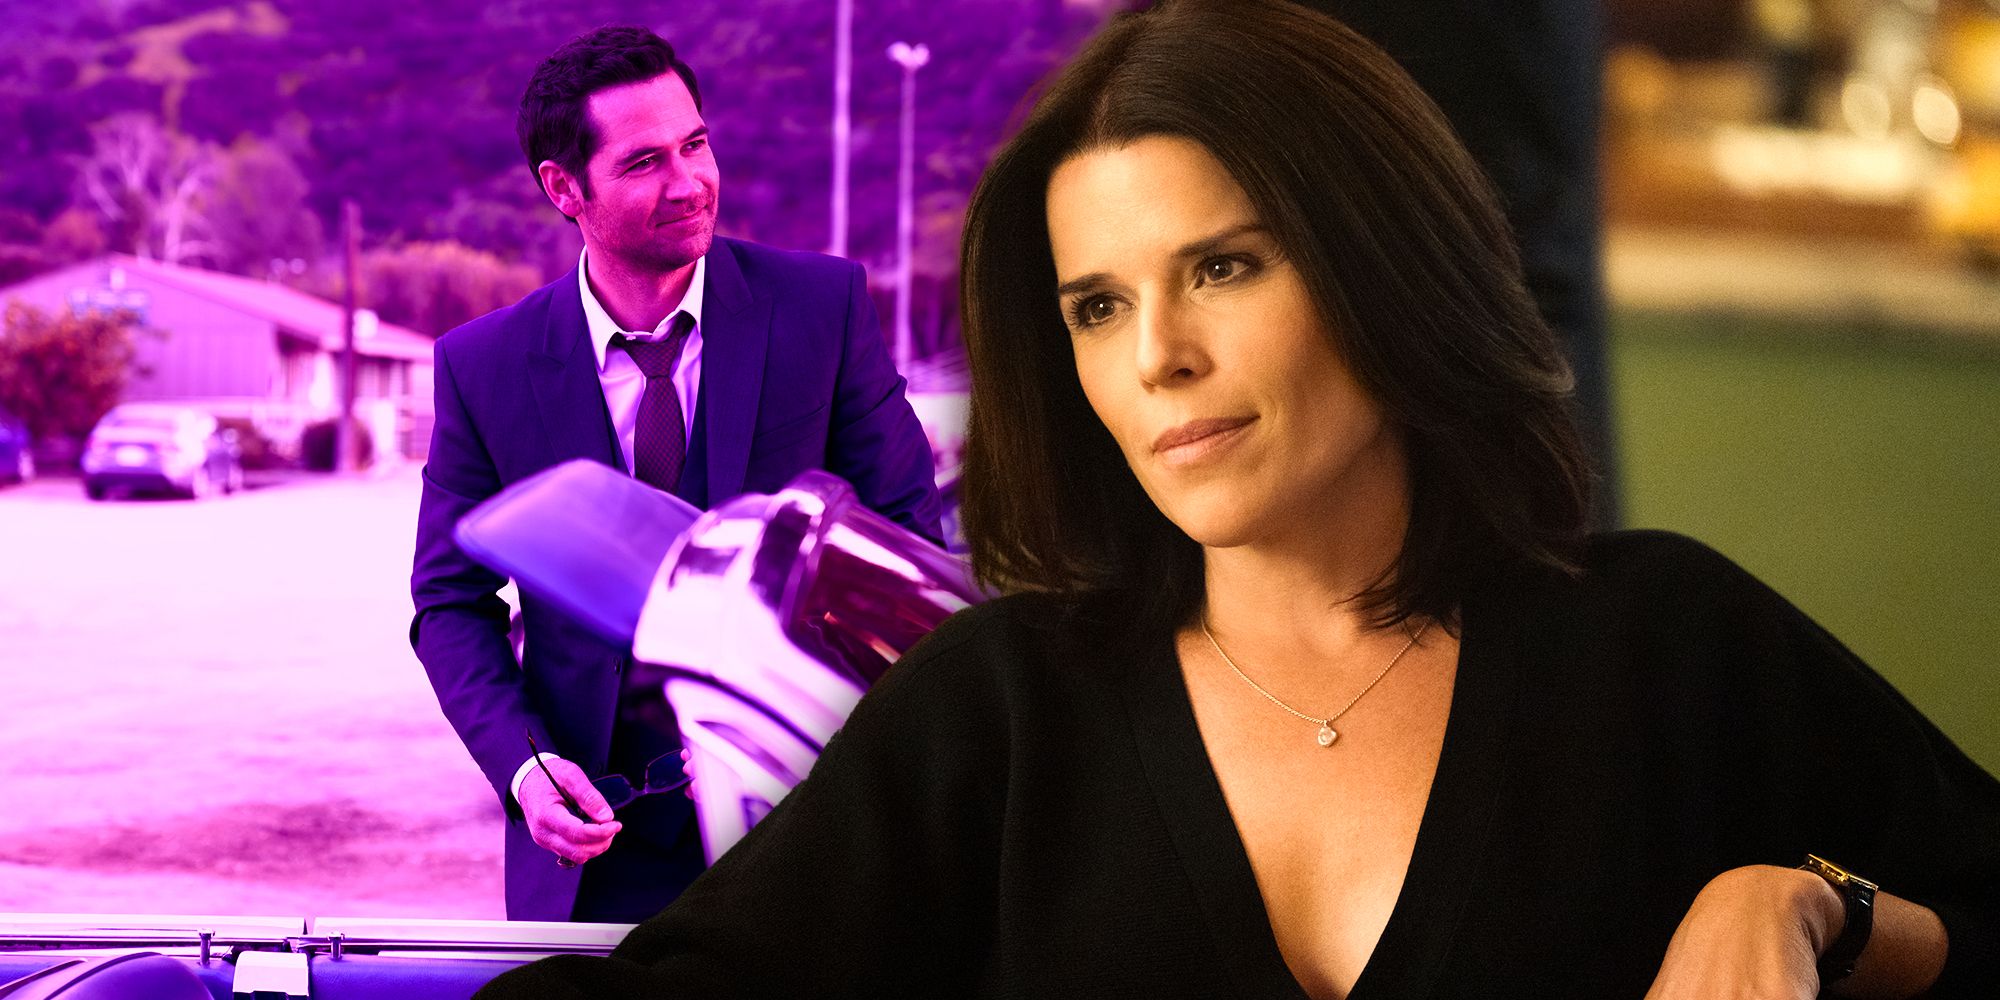 Manuel Garcia Rulfo as Mickey Haller and Neve Campbell as Maggie McPherson in Netflix's The Lincoln Lawyer season 2